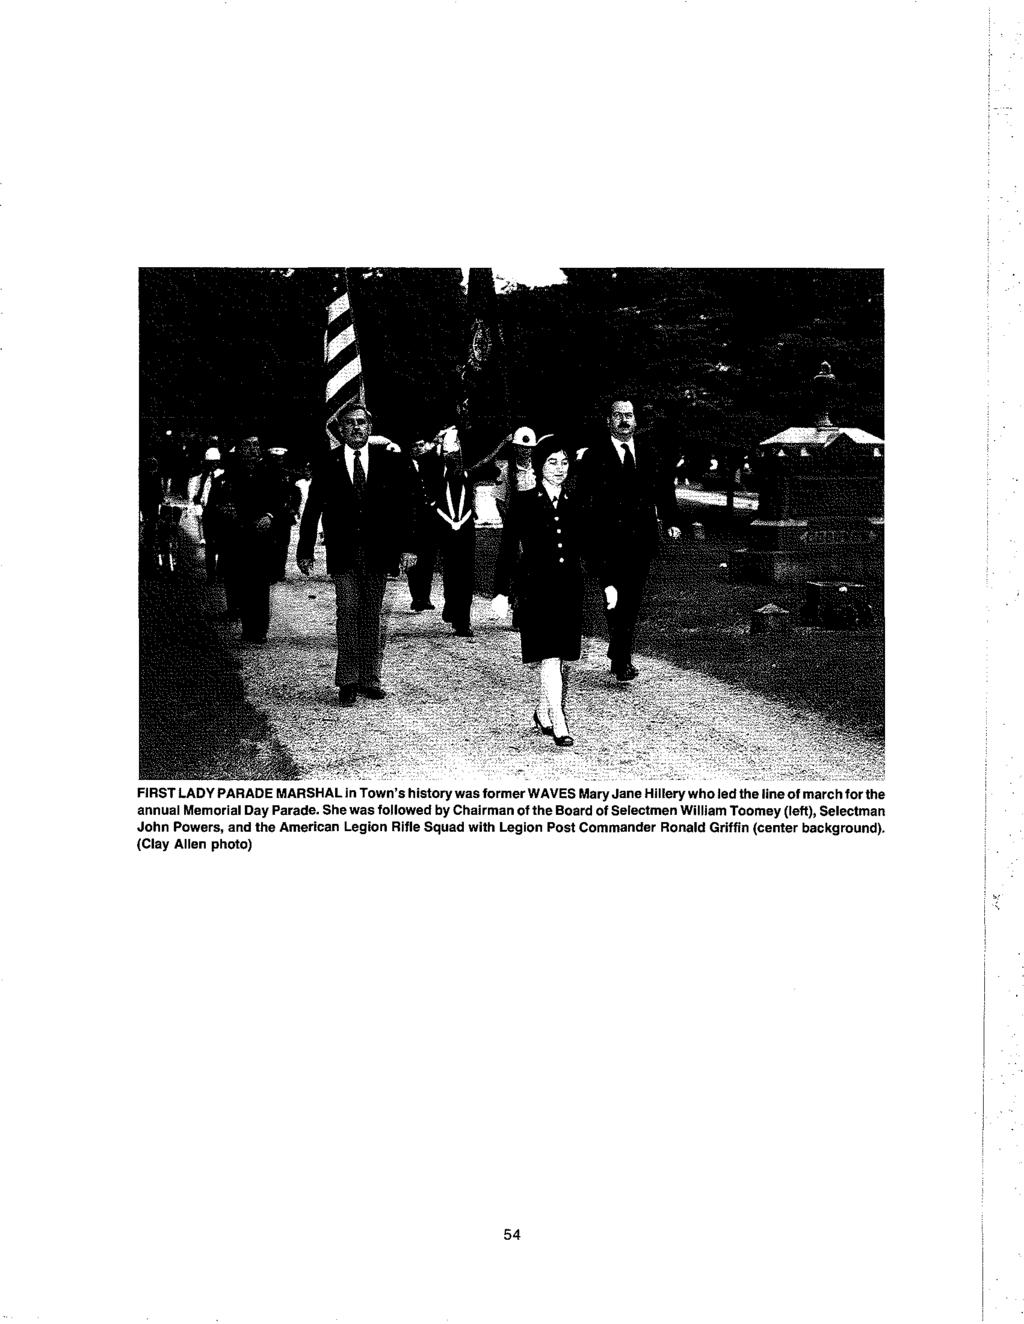 FIRST LADY PARADE MARSHAL in Town's history was former WAVES Mary Jane Hillery who led the line of march for the annual Memorial Day Parade.